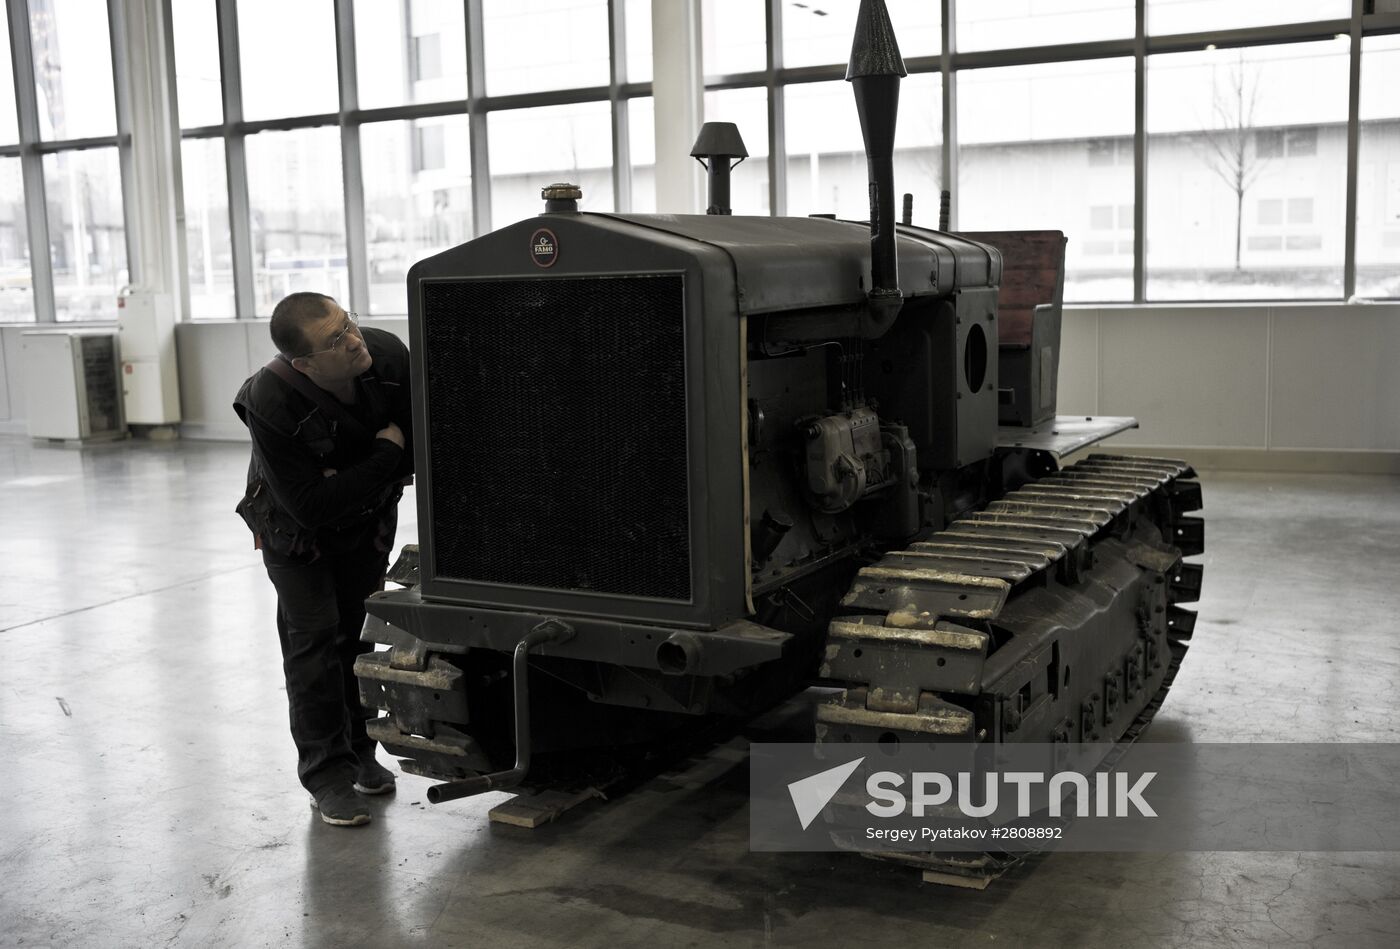 Preparations for opening of Engines of War exhibition of historical military vehicles